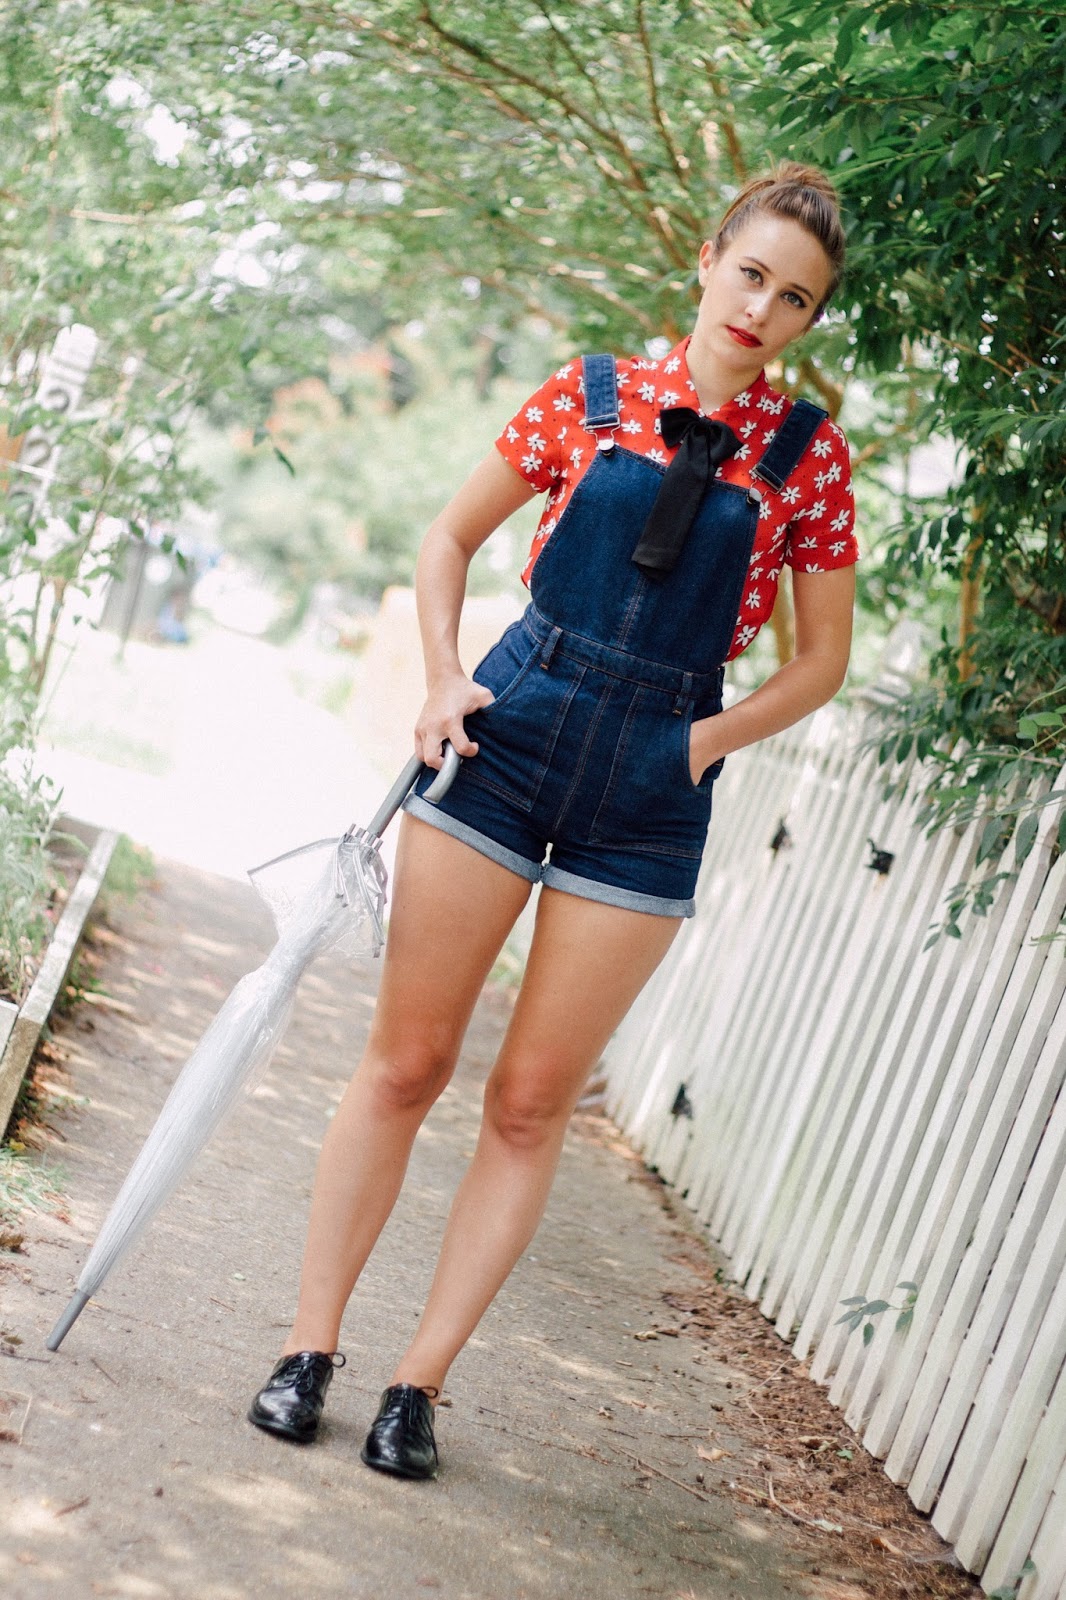 vintage, retro, style, vintage style, retro style, asos, denim overalls, high waisted, cute, girly, feminine, summer outfit, bow tie, floral button up, taylor swift style, personal style, blogger, movie blogger, mad men style, 